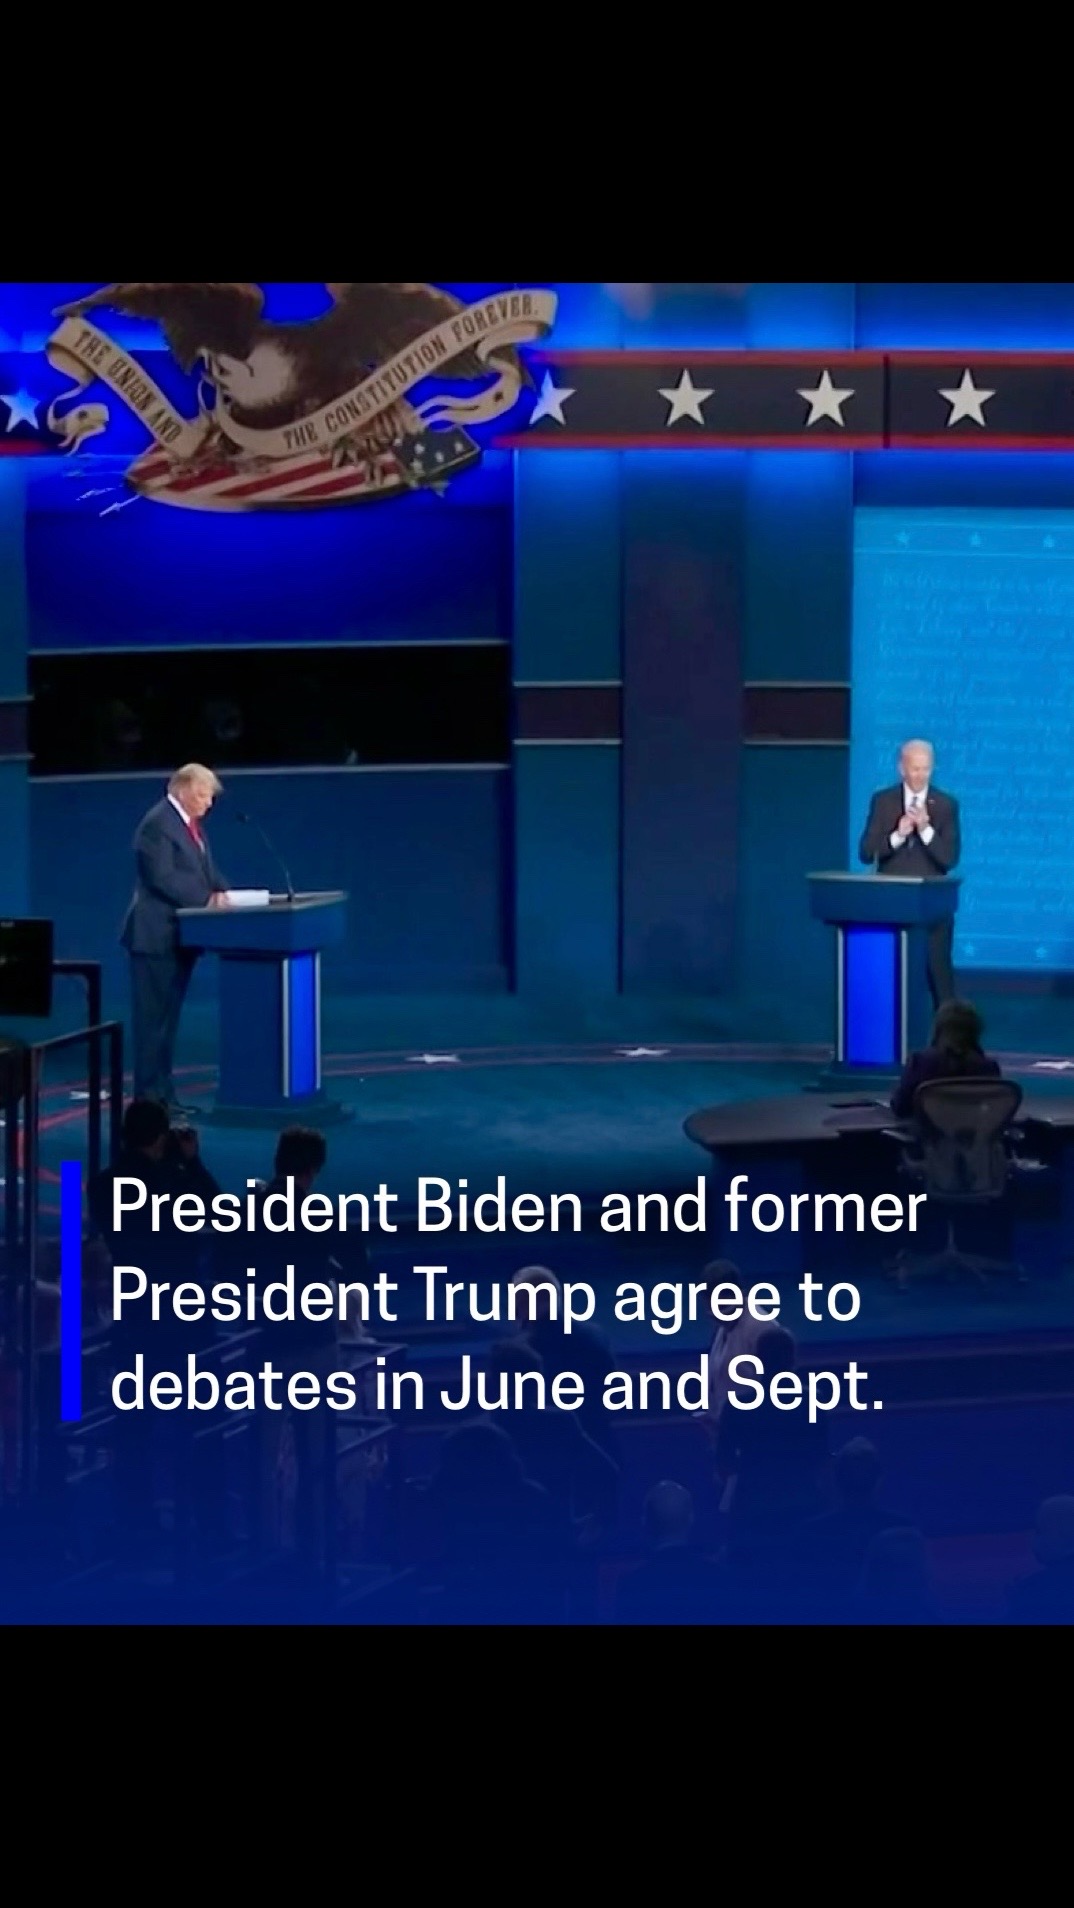 President Biden and former President Trump on Wednesday both accepted invitations to participate in a June 27 debate hosted by CNN as well as a Sept. 10 debate held by ABC News.   “Trump lost two debates to me in 2020. Since then, he hasn’t shown up for a debate,” President Biden said in a video released this morning. “Now he’s acting like he wants to debate me again. Well, make my day, pal. I’ll even do it twice. First pick the dates, Donald. I hear you’re free on Wednesdays,”   “I am Ready and Willing to Debate Crooked Joe at the two proposed times in June and September,” Mr. Trump responded on social media. “I would strongly recommend more than two debates and, for excitement purposes, a